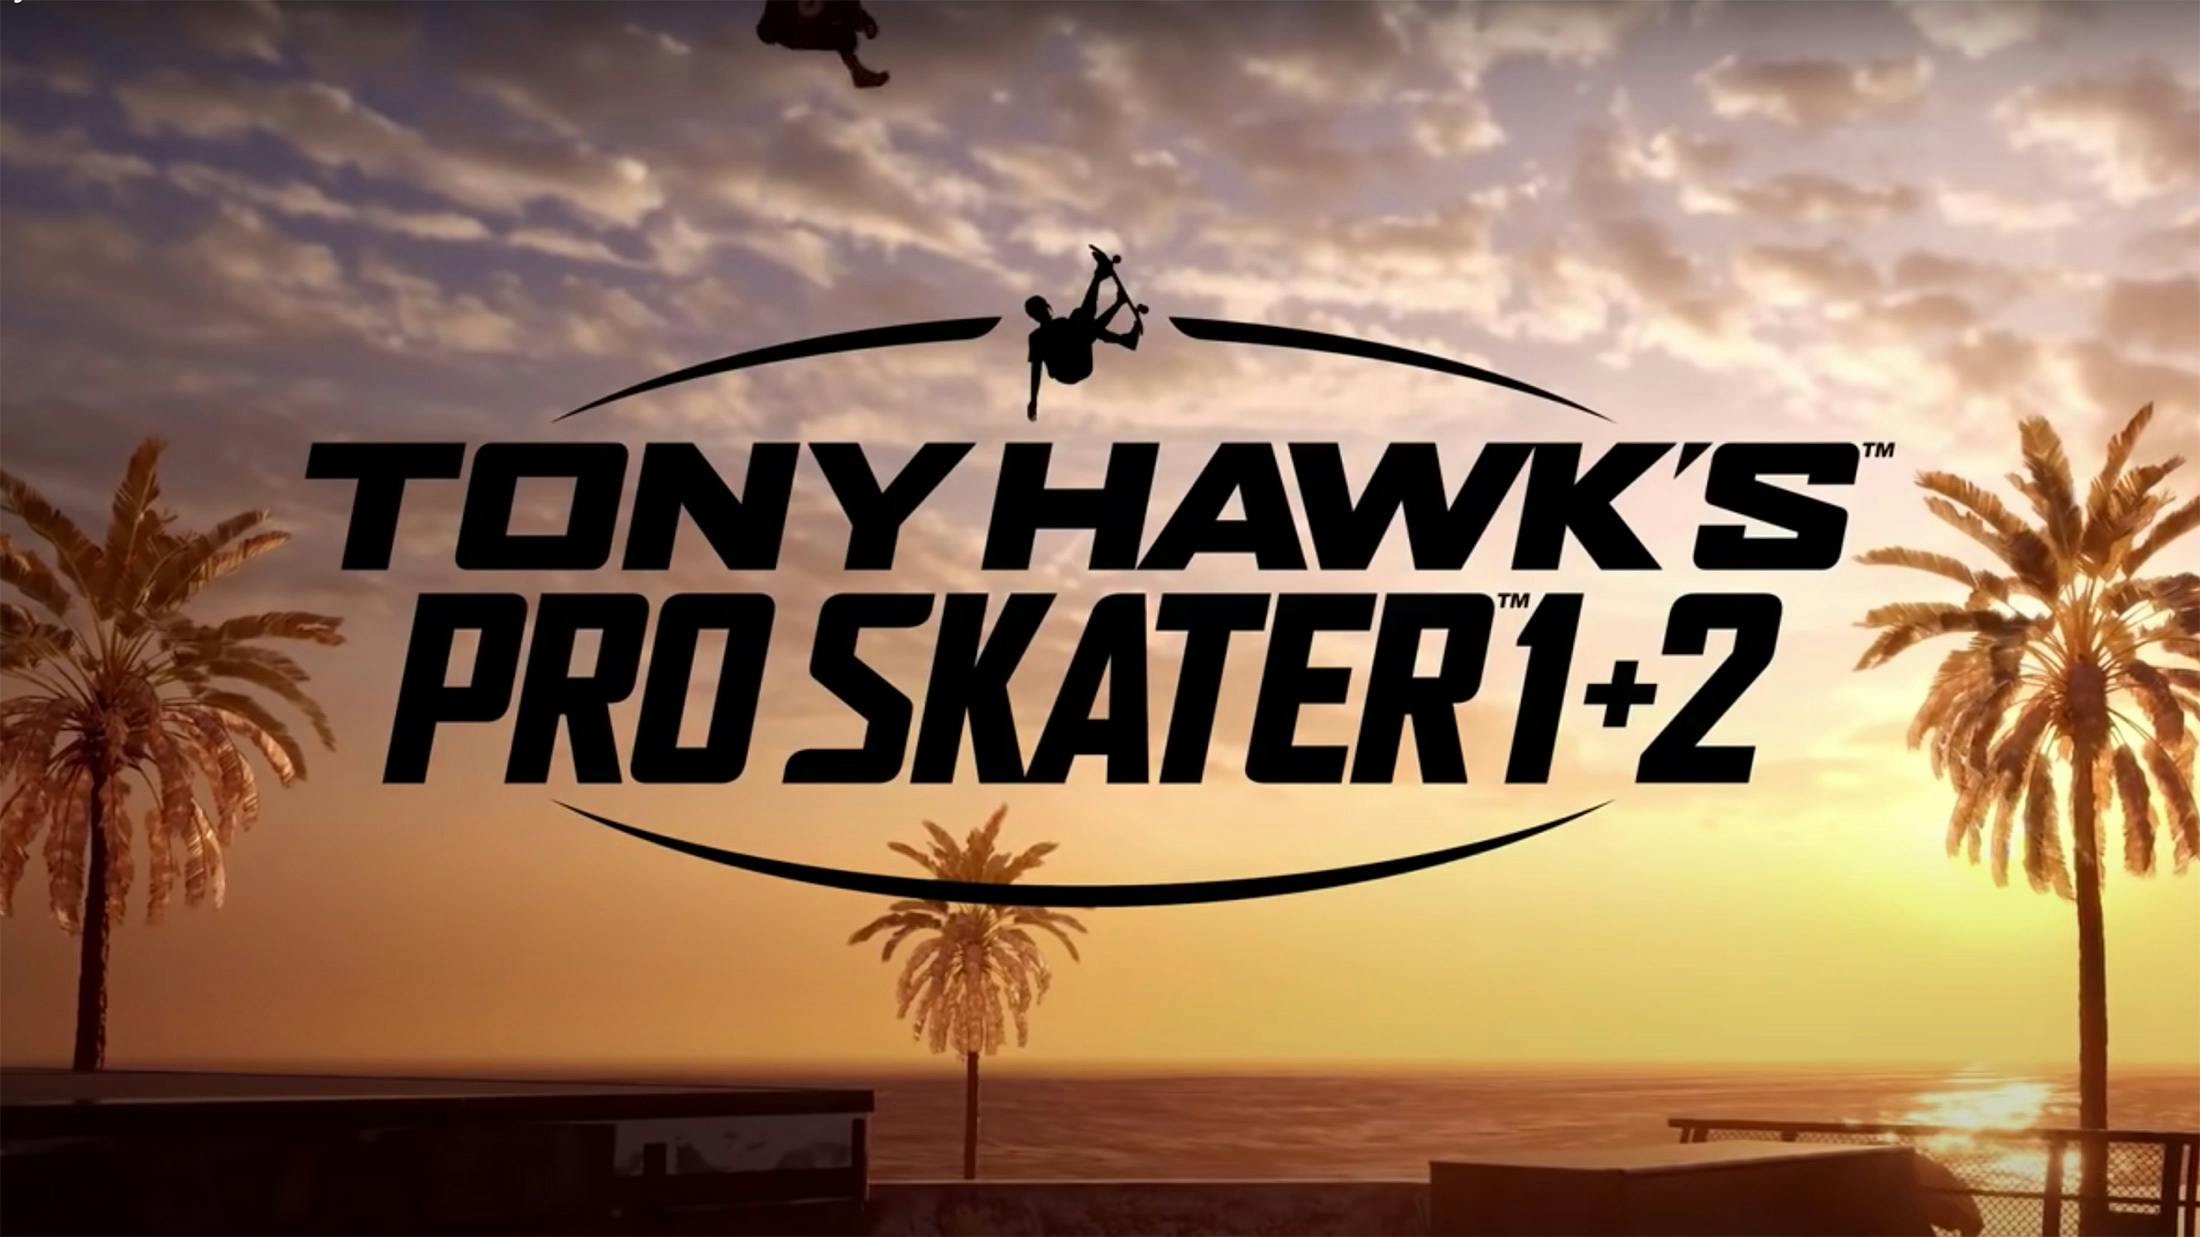 10 songs that should be included on the new Tony Hawk’s Soundtrack